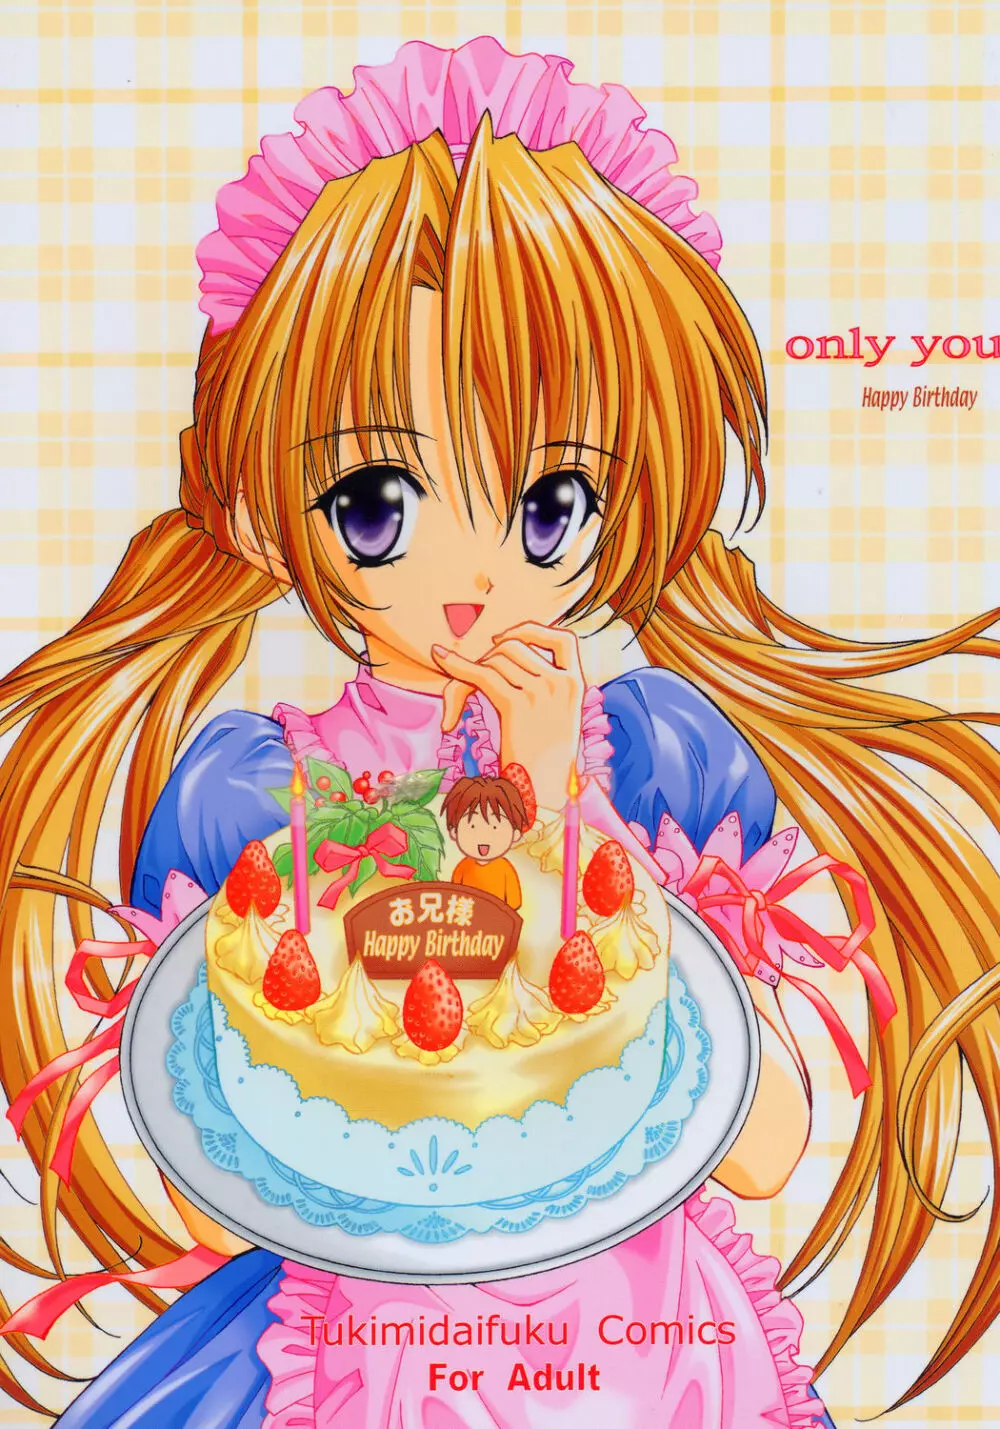 Only You Happy Birthday Page.1